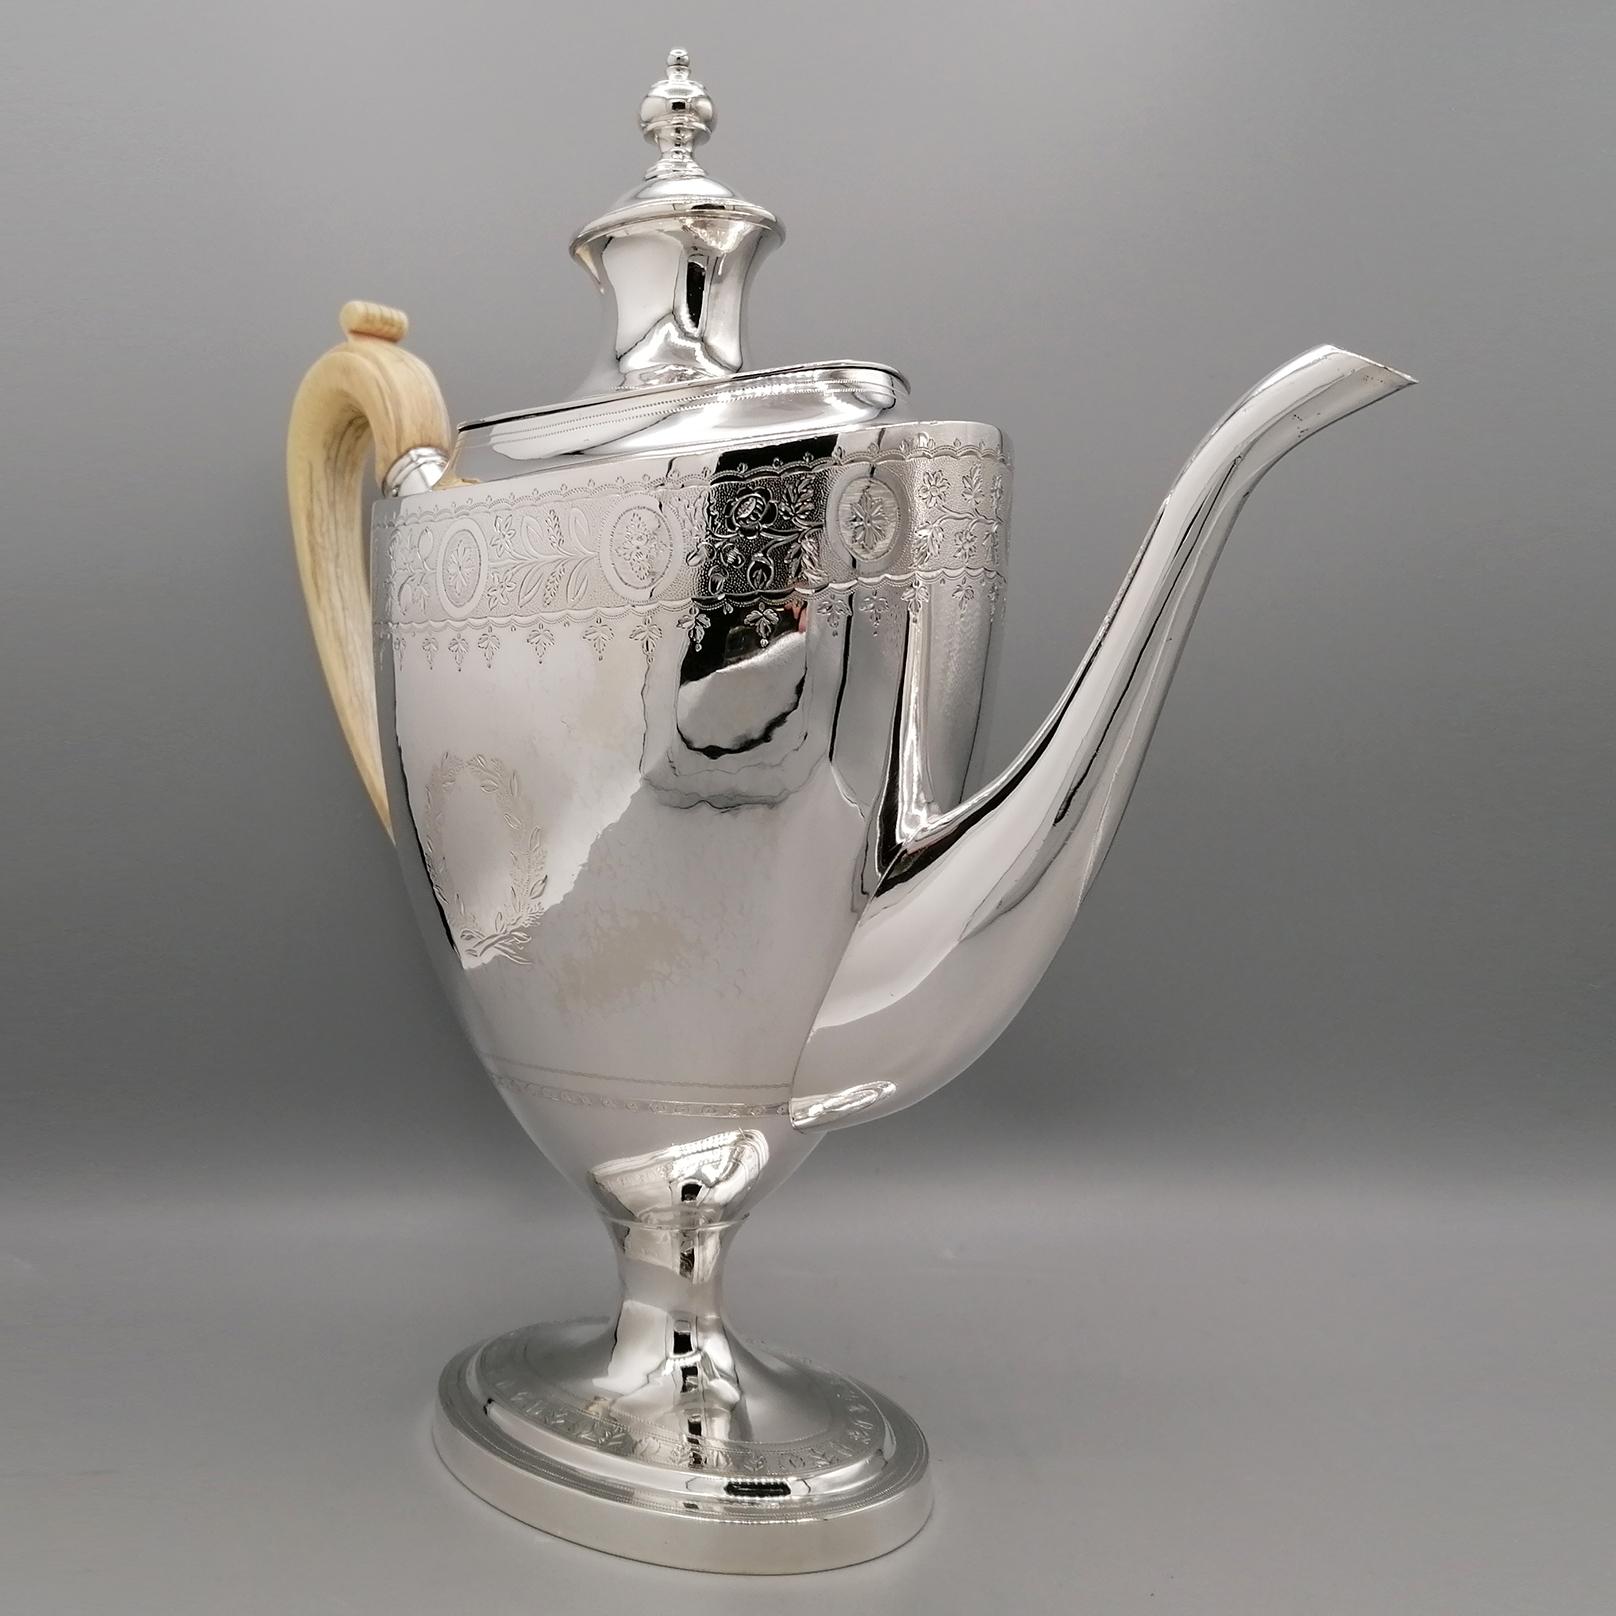 Antique George III Sterling Silver Tea-Coffeeset ivory Handles & Tray 1798-1800 For Sale 10